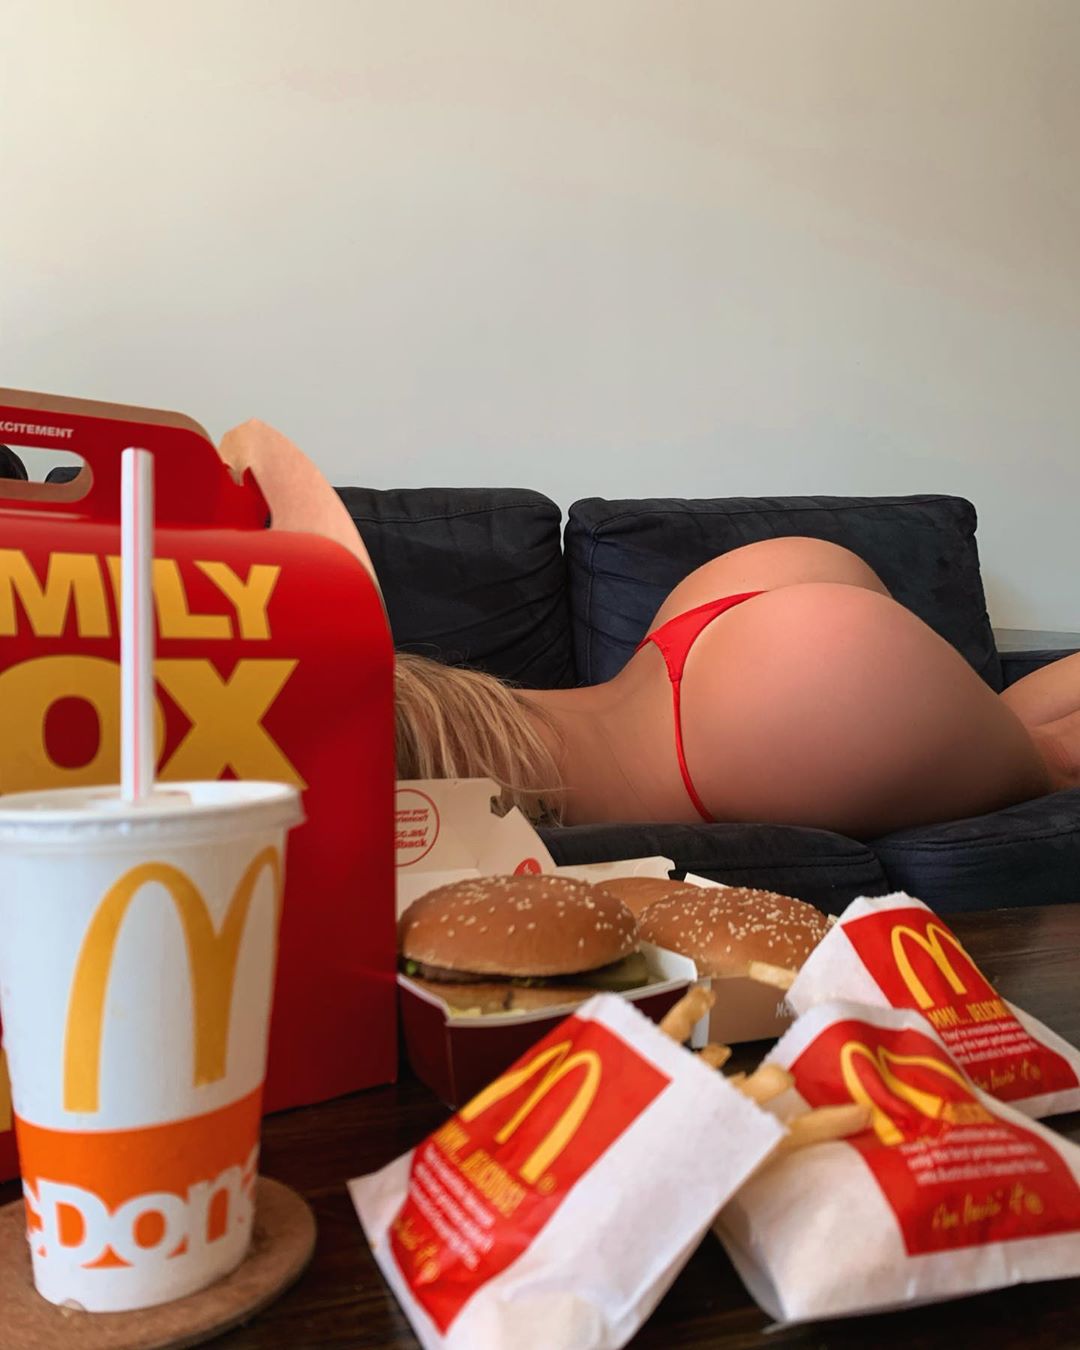 Mcdonalds Porn - What McDonald's includes that in the family box meal?! Foto Porno - EPORNER